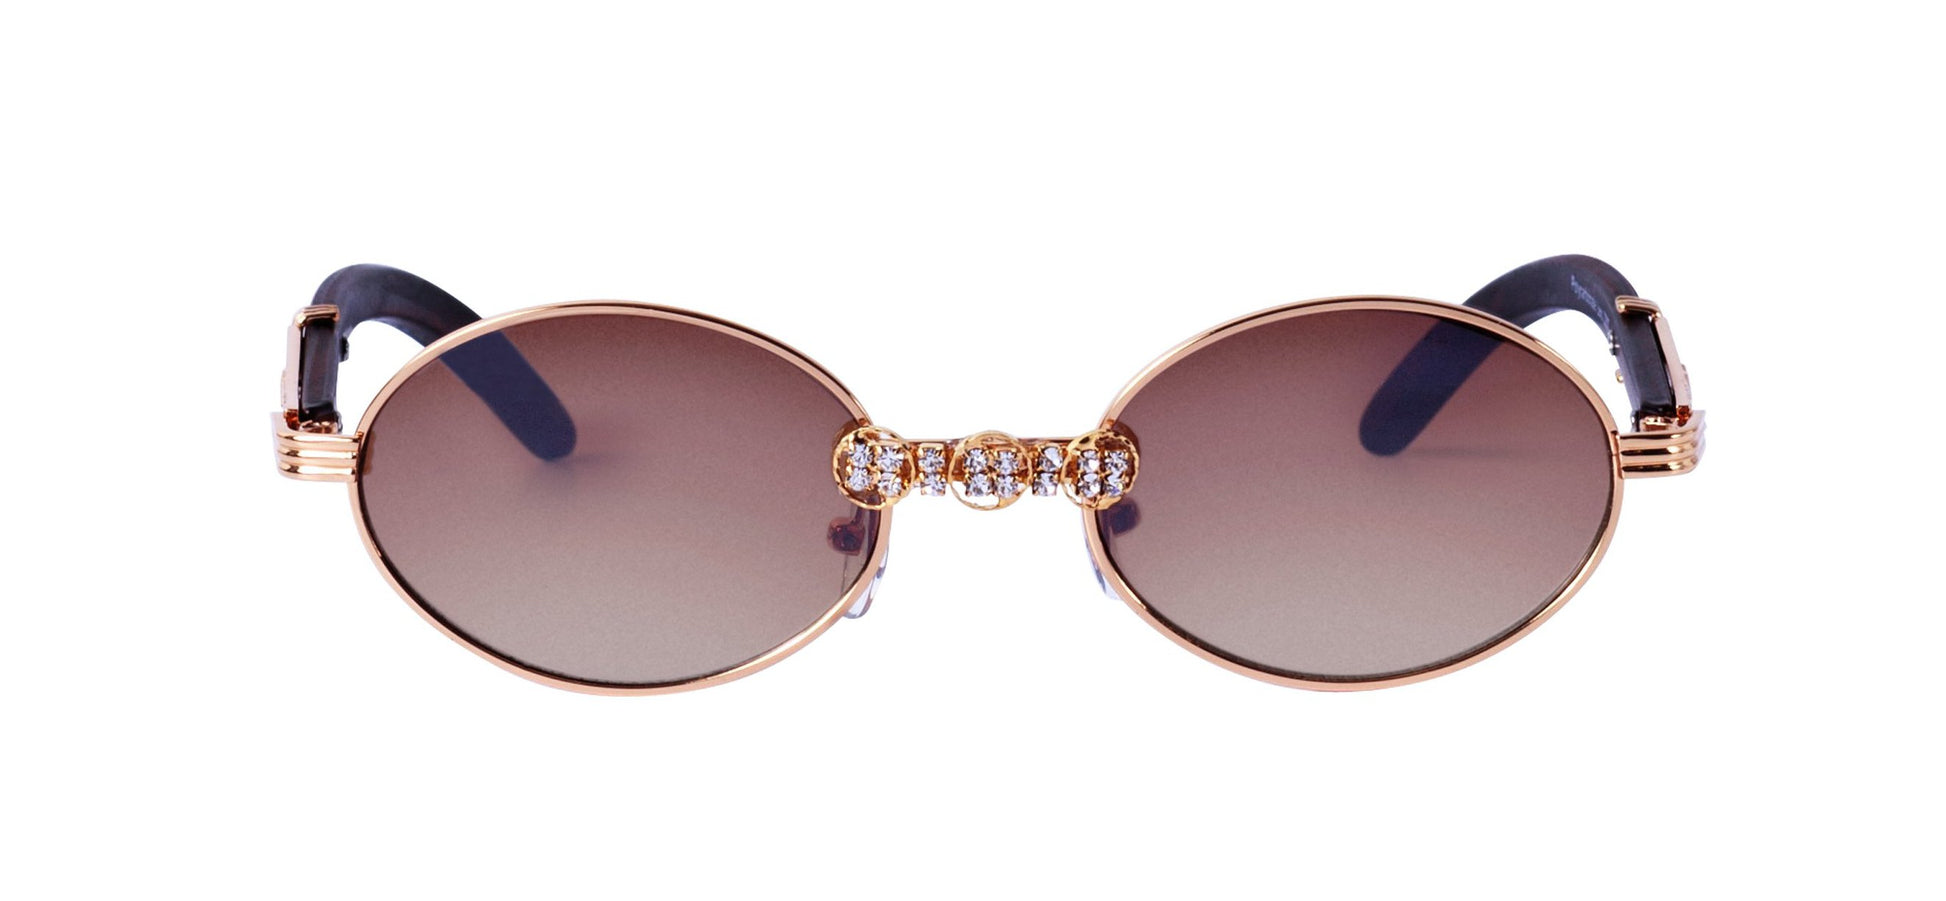 ICONIC VINTAGE SUNNIES: OVALIQUE GOLD FRAME! cocoa/gold frame SUNNIES + OPTICS Sunglasses Collection- NRODA